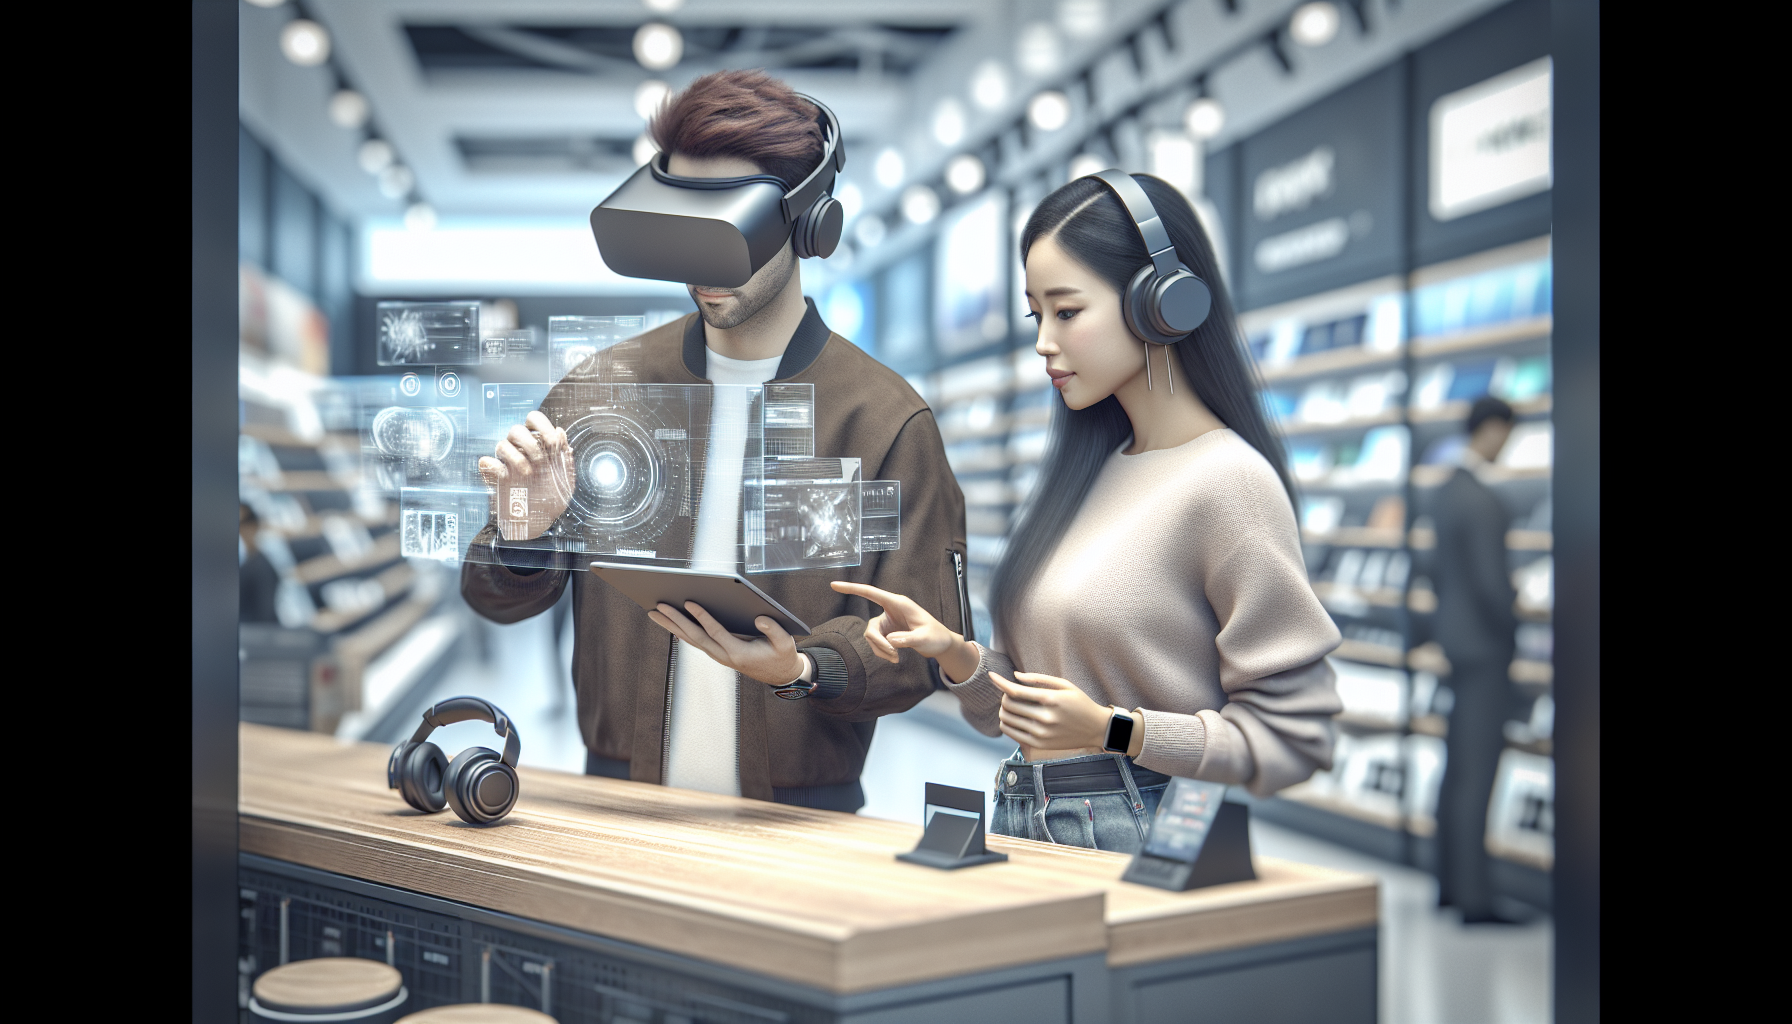 Looking Ahead: The Future of AR in Consumer Decisions